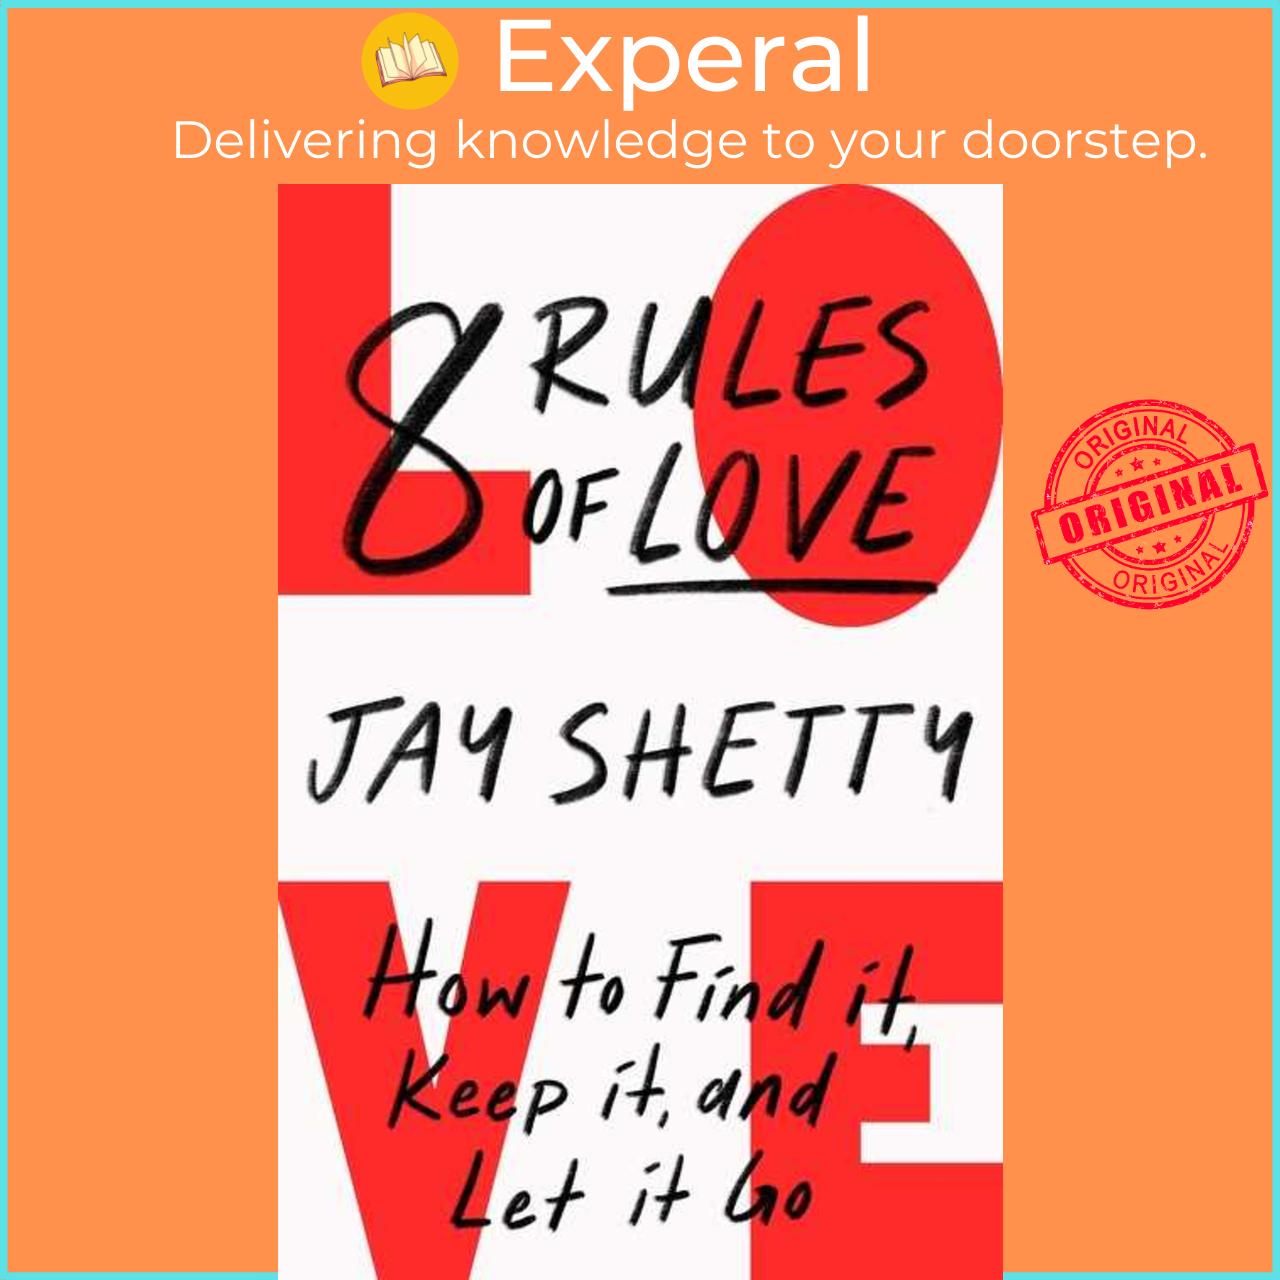 Sách - 8 Rules of Love : How to Find it, Keep it, and Let it Go by Jay Shetty (UK edition, paperback)